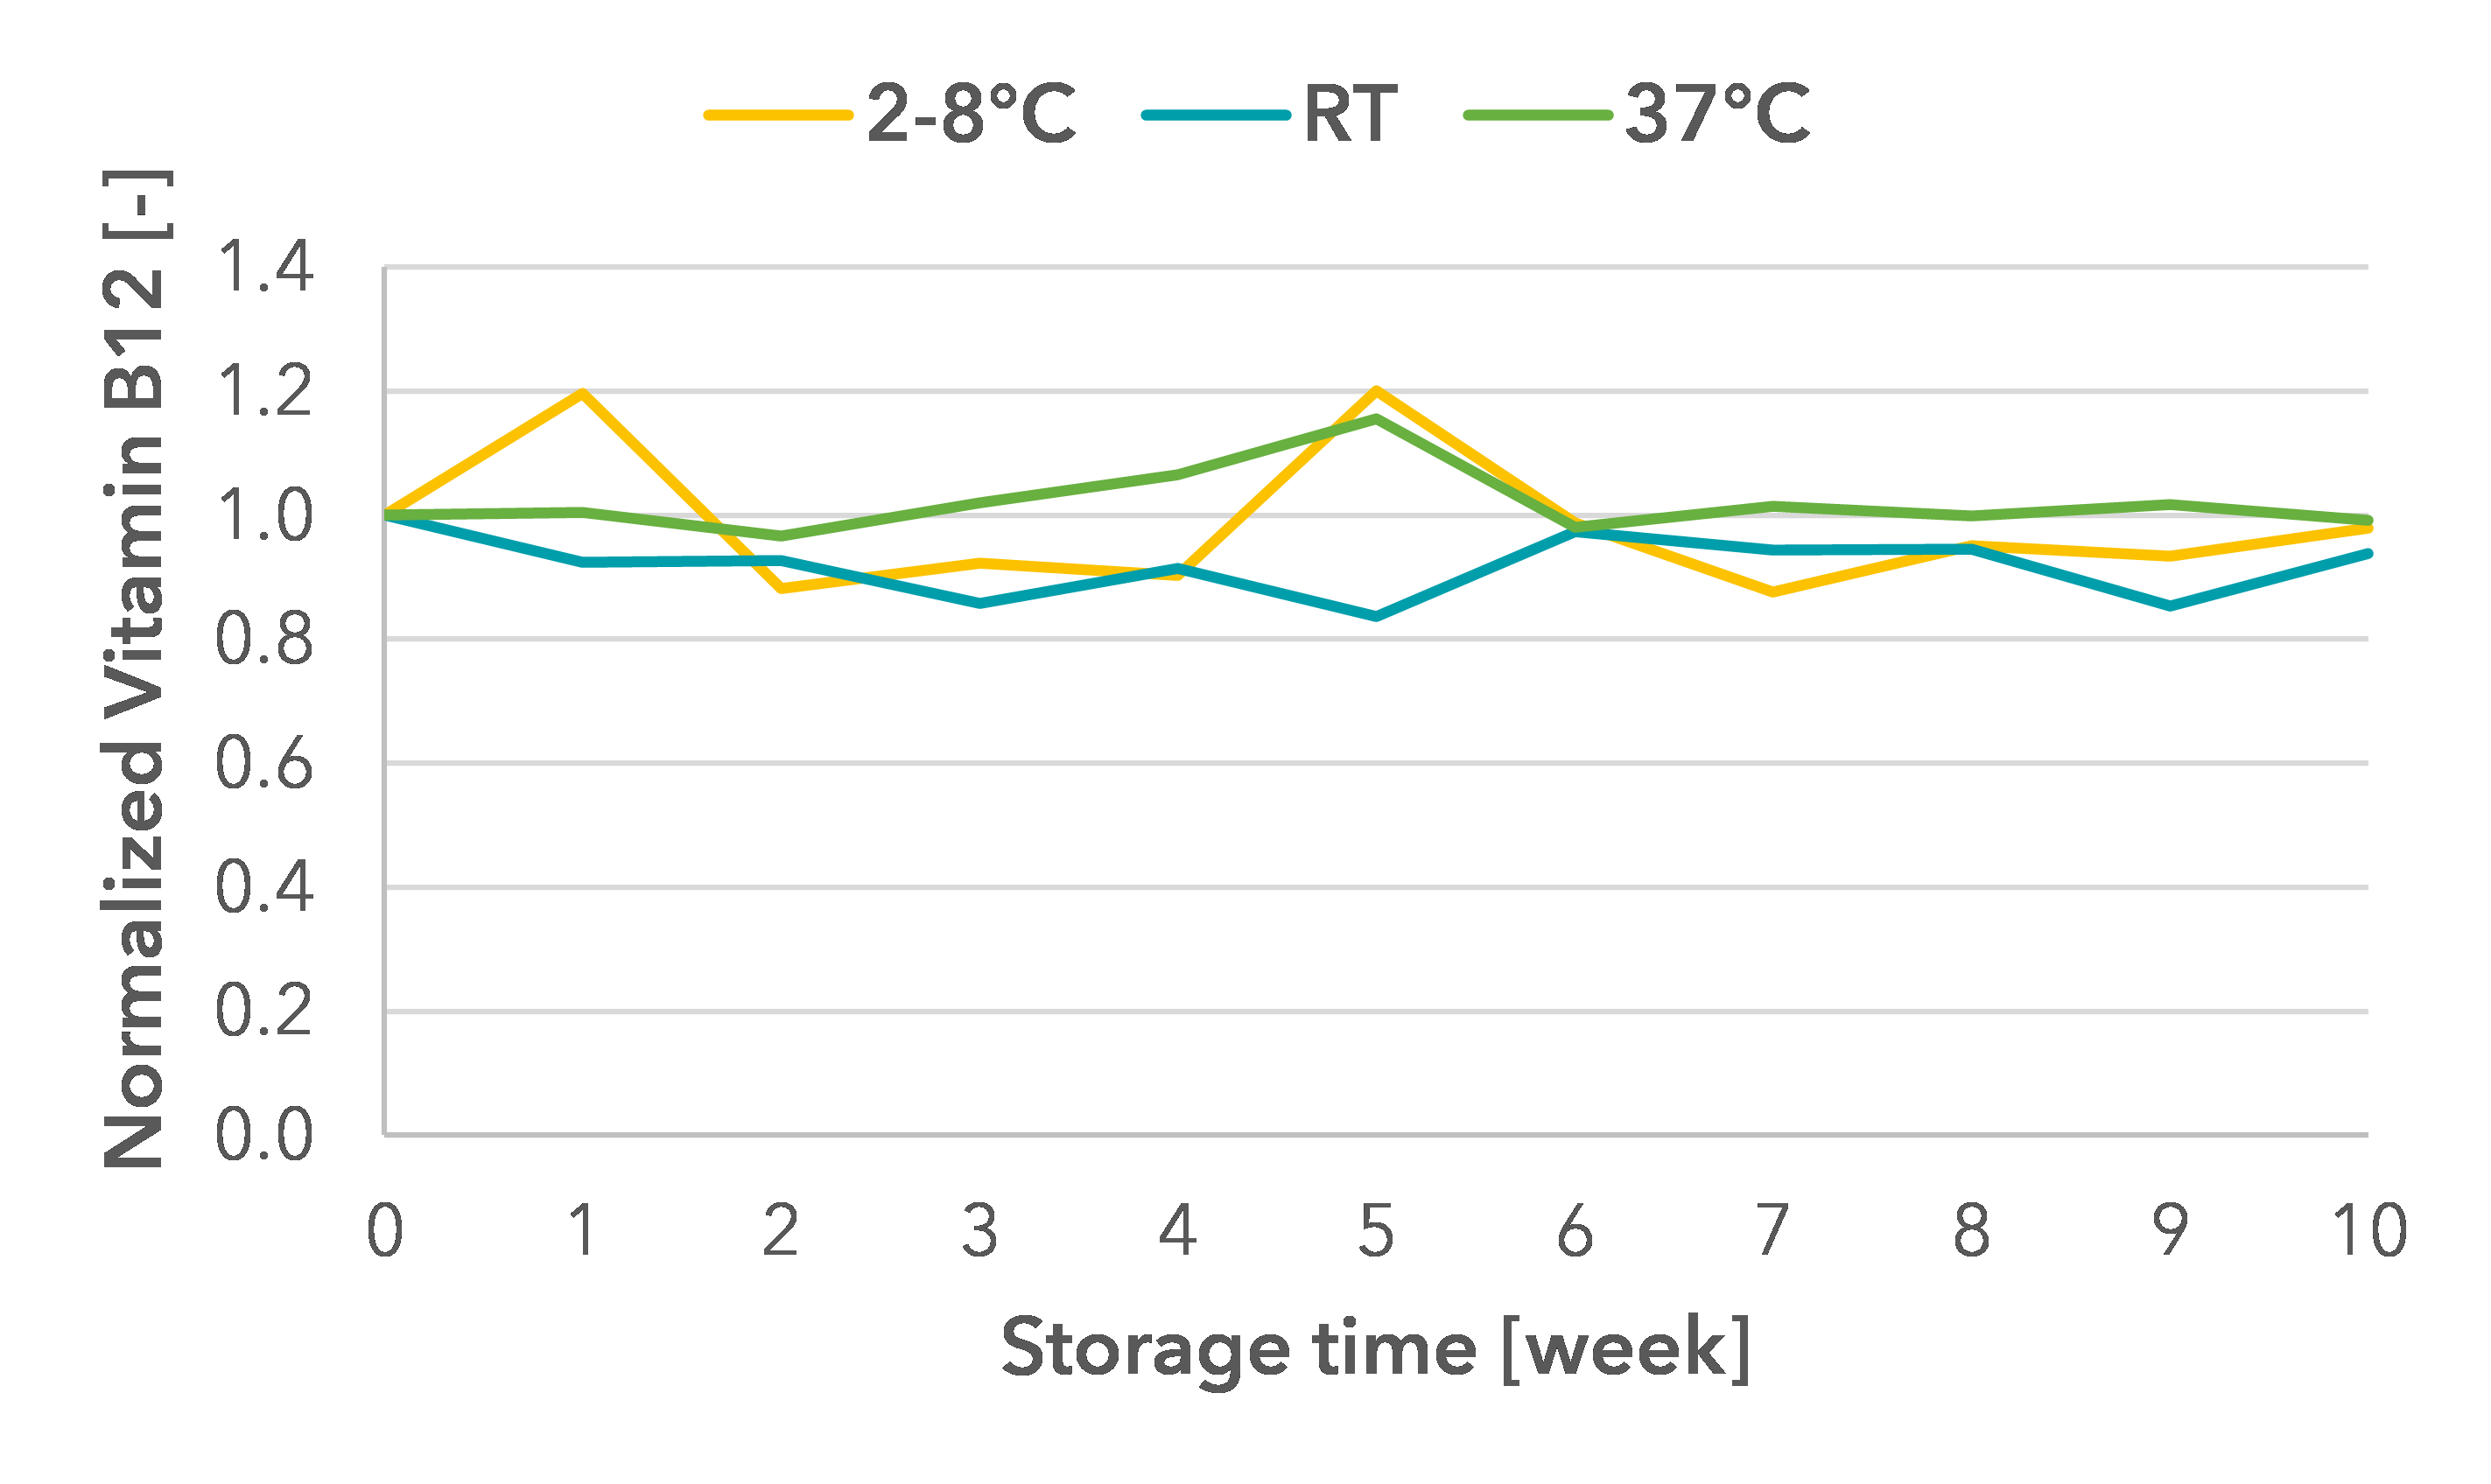 Normalized vitamin B12 (cyanocobalamin) data over 10 weeks at temporarily deviating storage conditions (RT = room temperature or 37°C) compared to the recommended storage at 2-8°C, as an example for a stable vitamin.